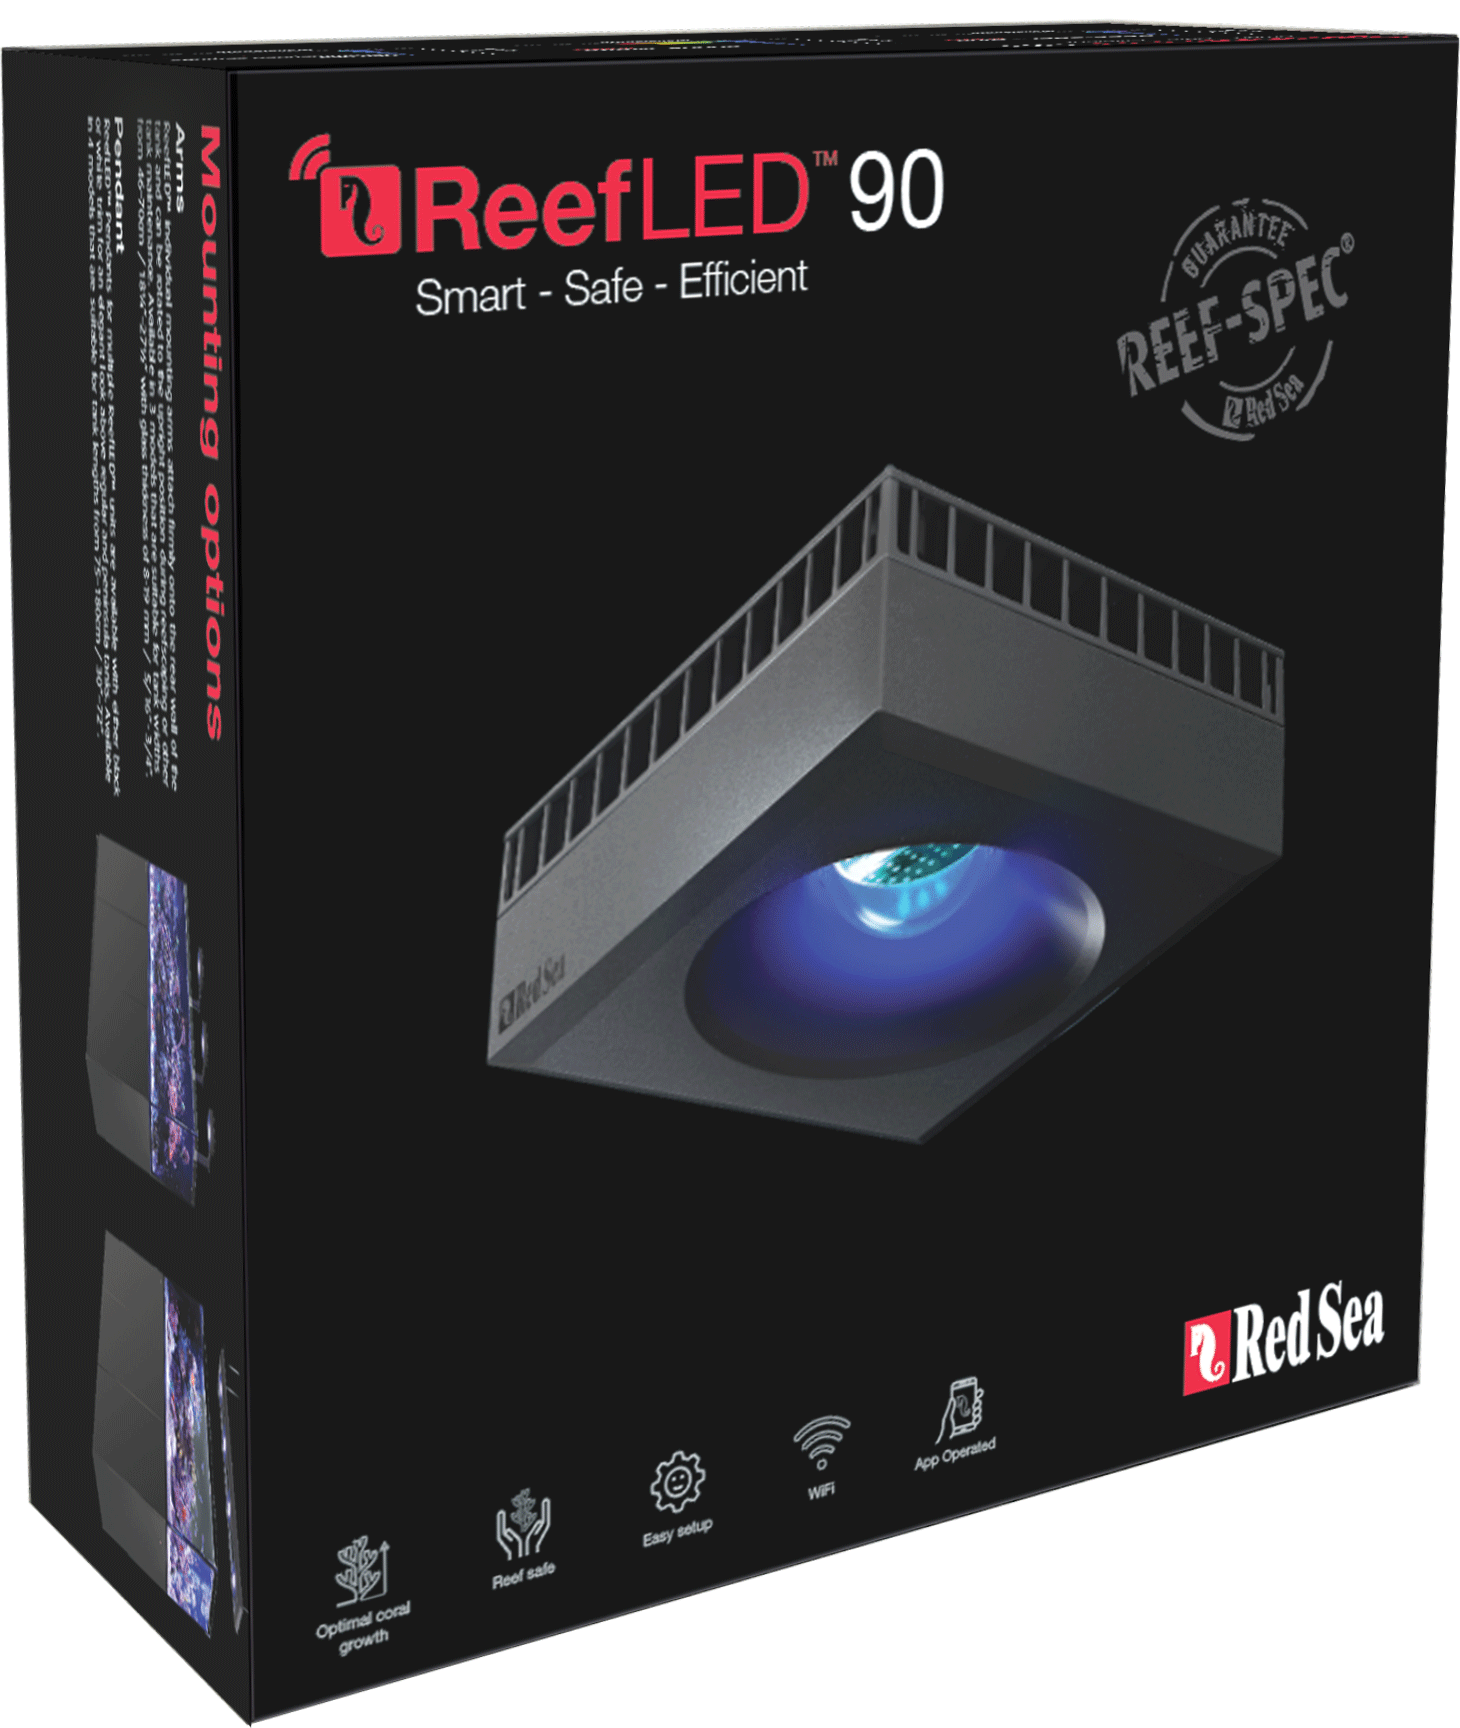 Red Sea ReedLED 90 light